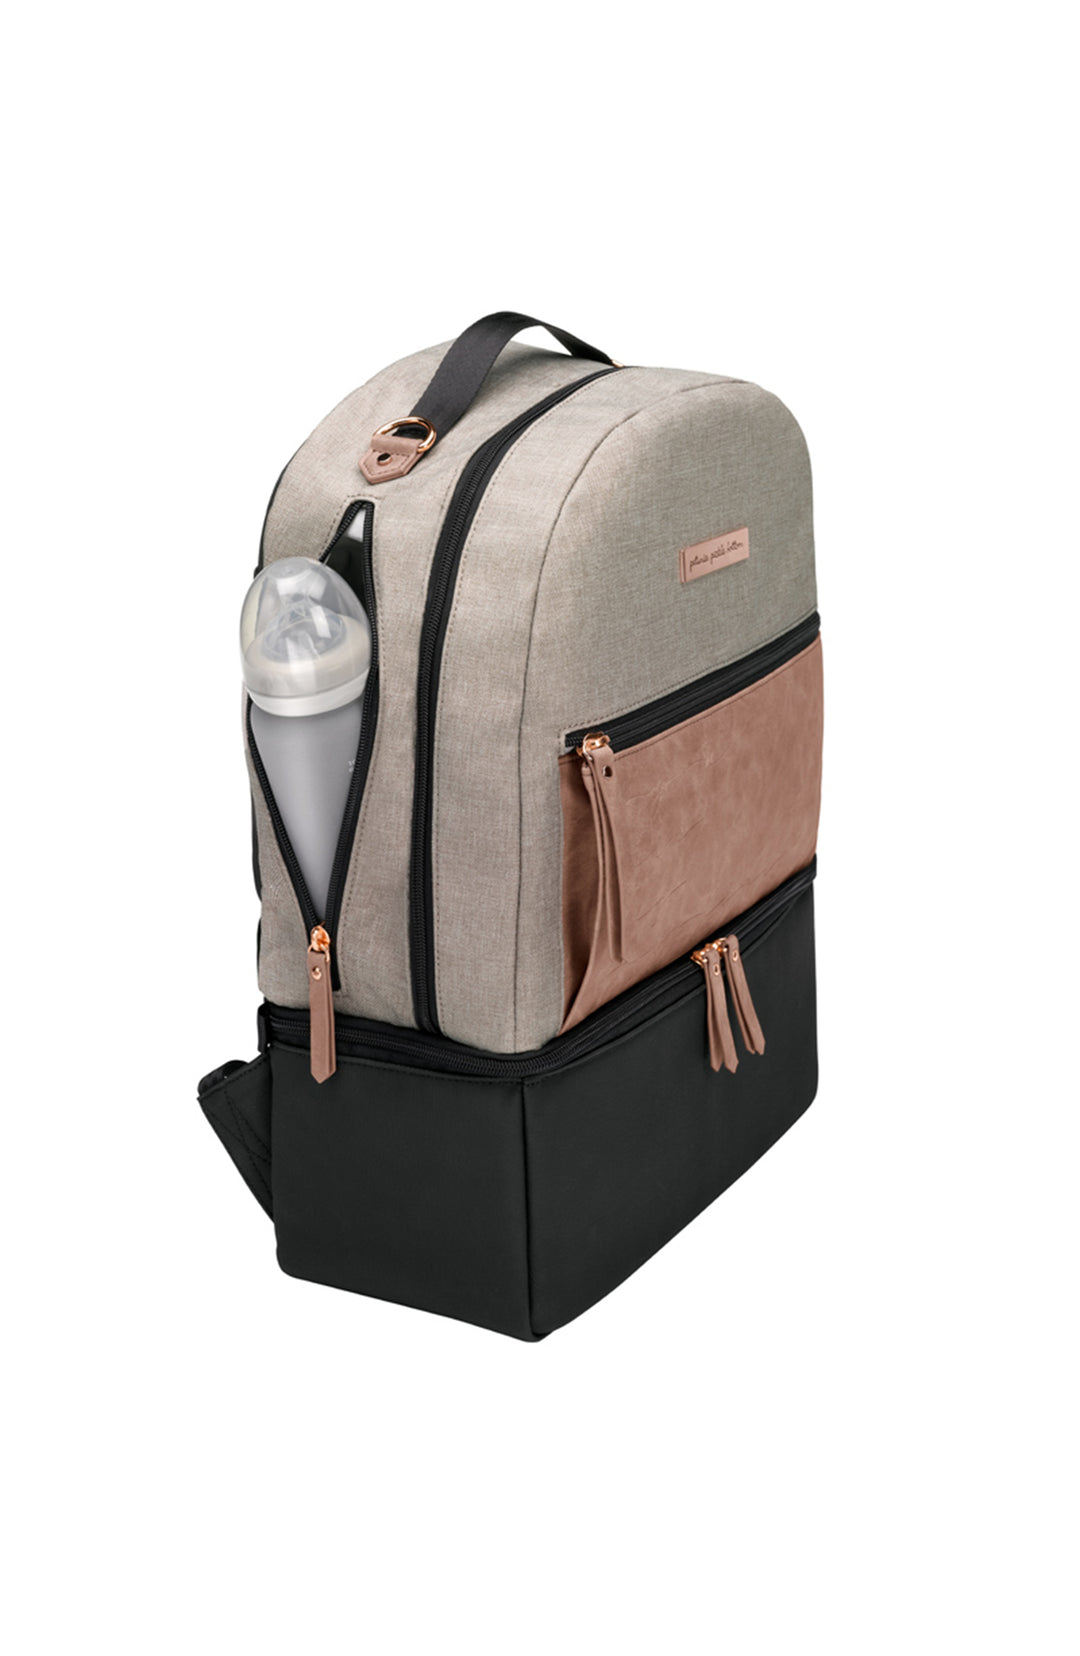 Axis Backpack - Dusty Rose/Sand